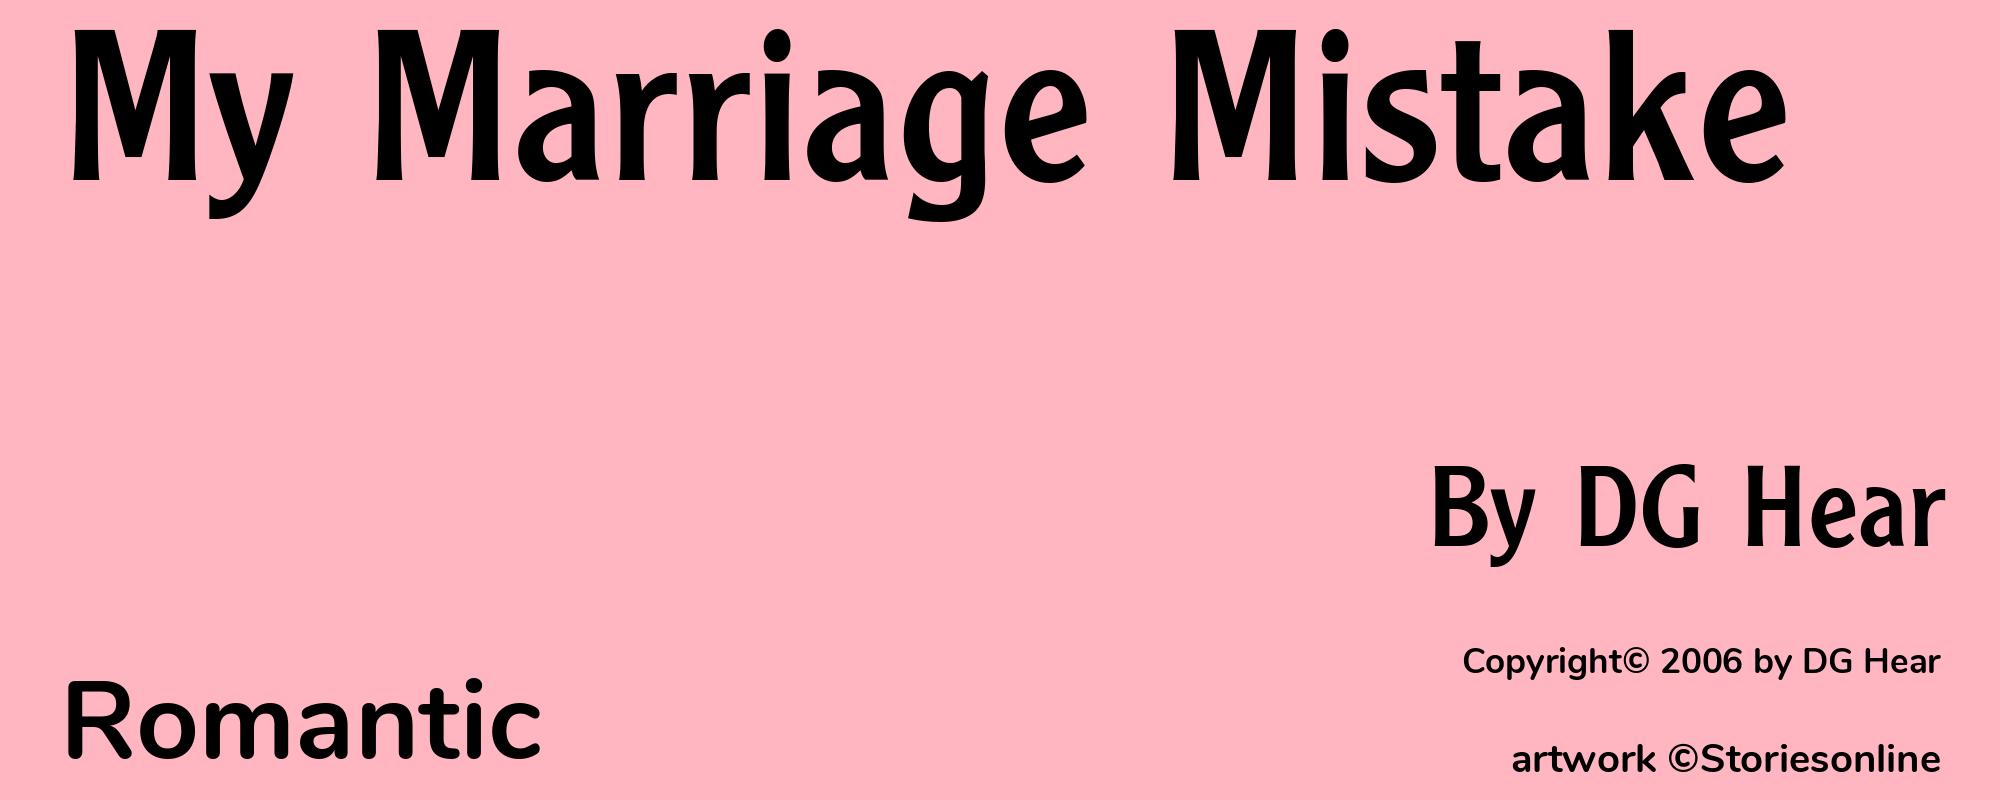 My Marriage Mistake - Cover